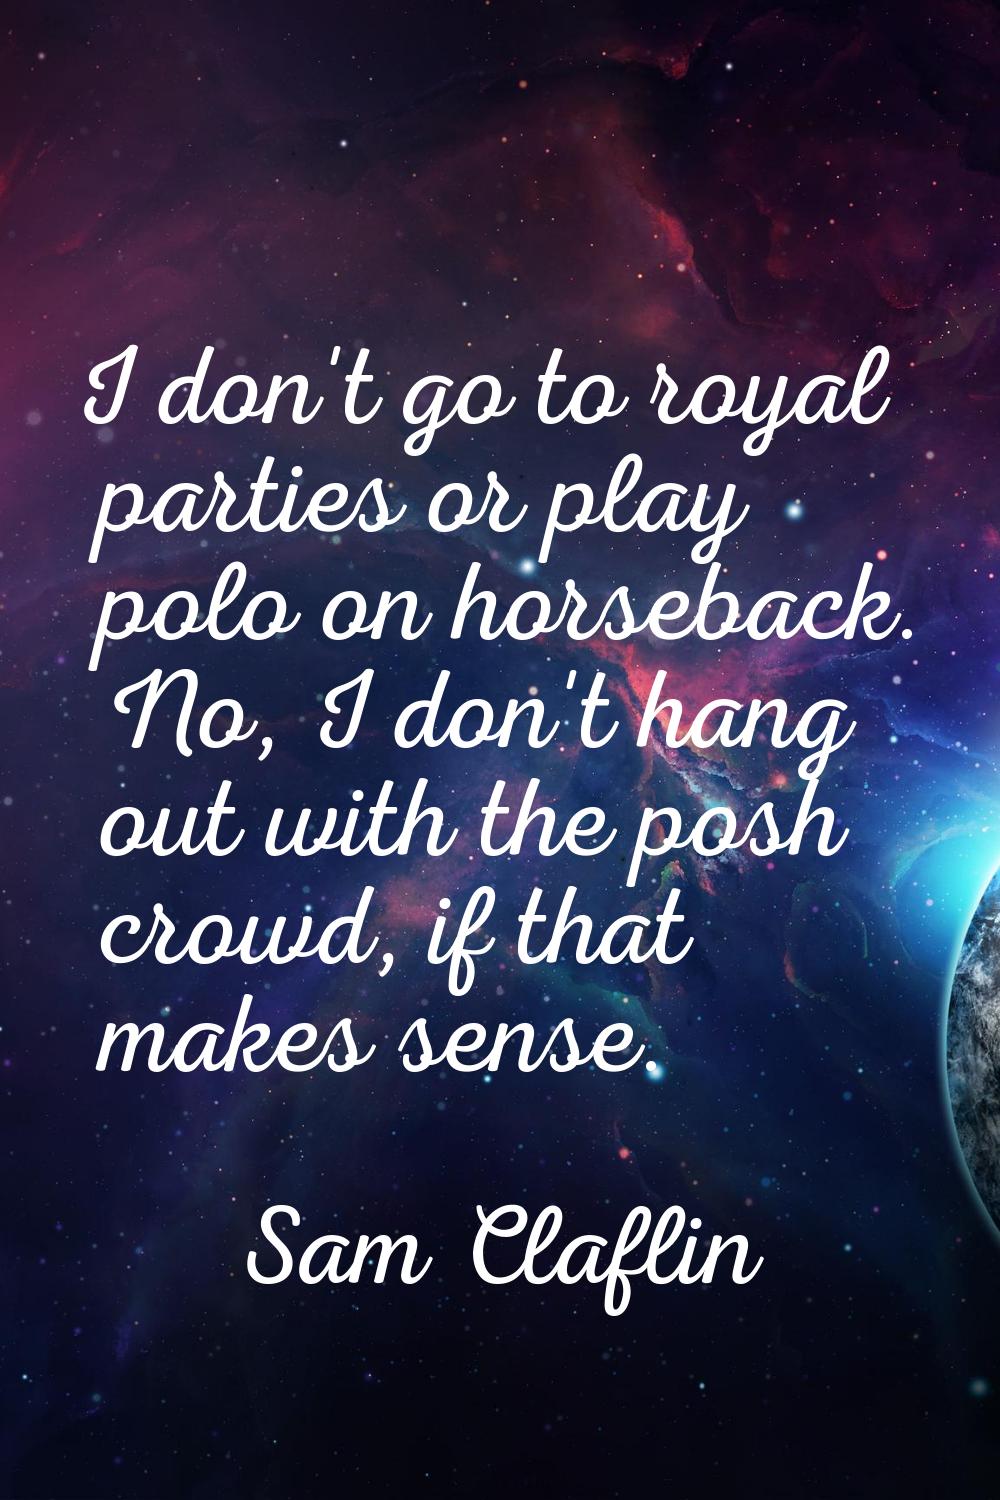 I don't go to royal parties or play polo on horseback. No, I don't hang out with the posh crowd, if